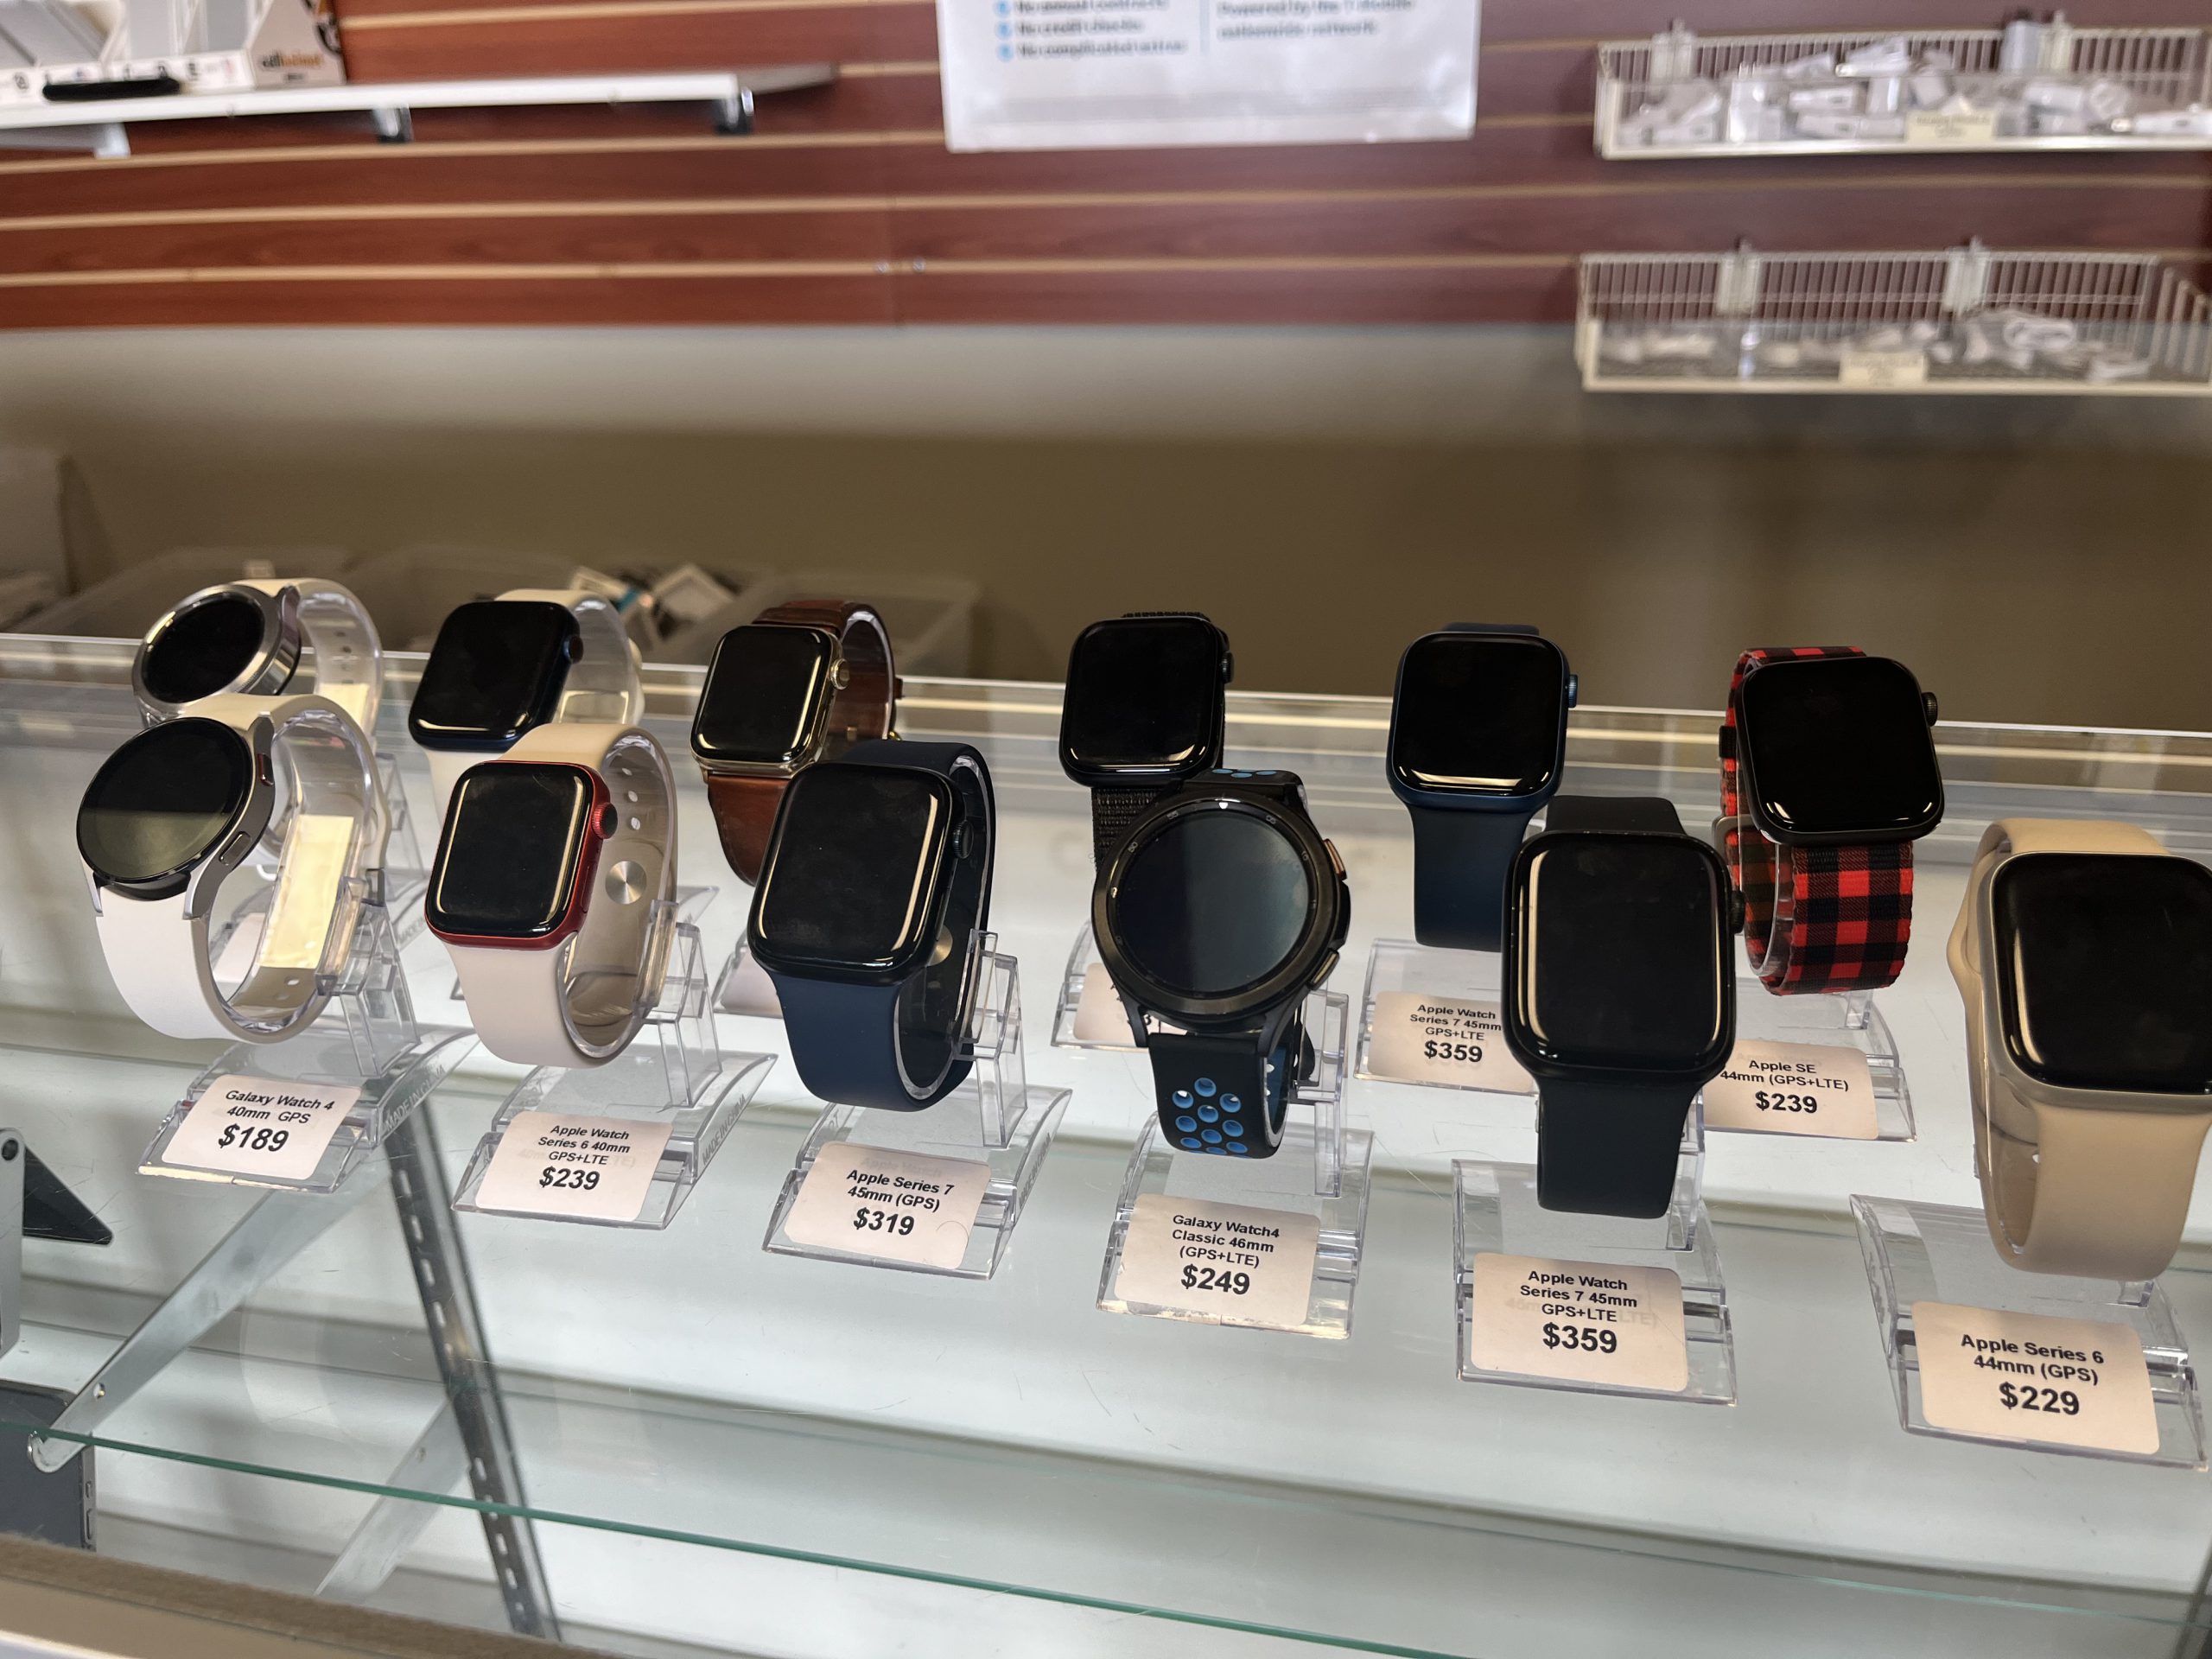 used smart watches near me